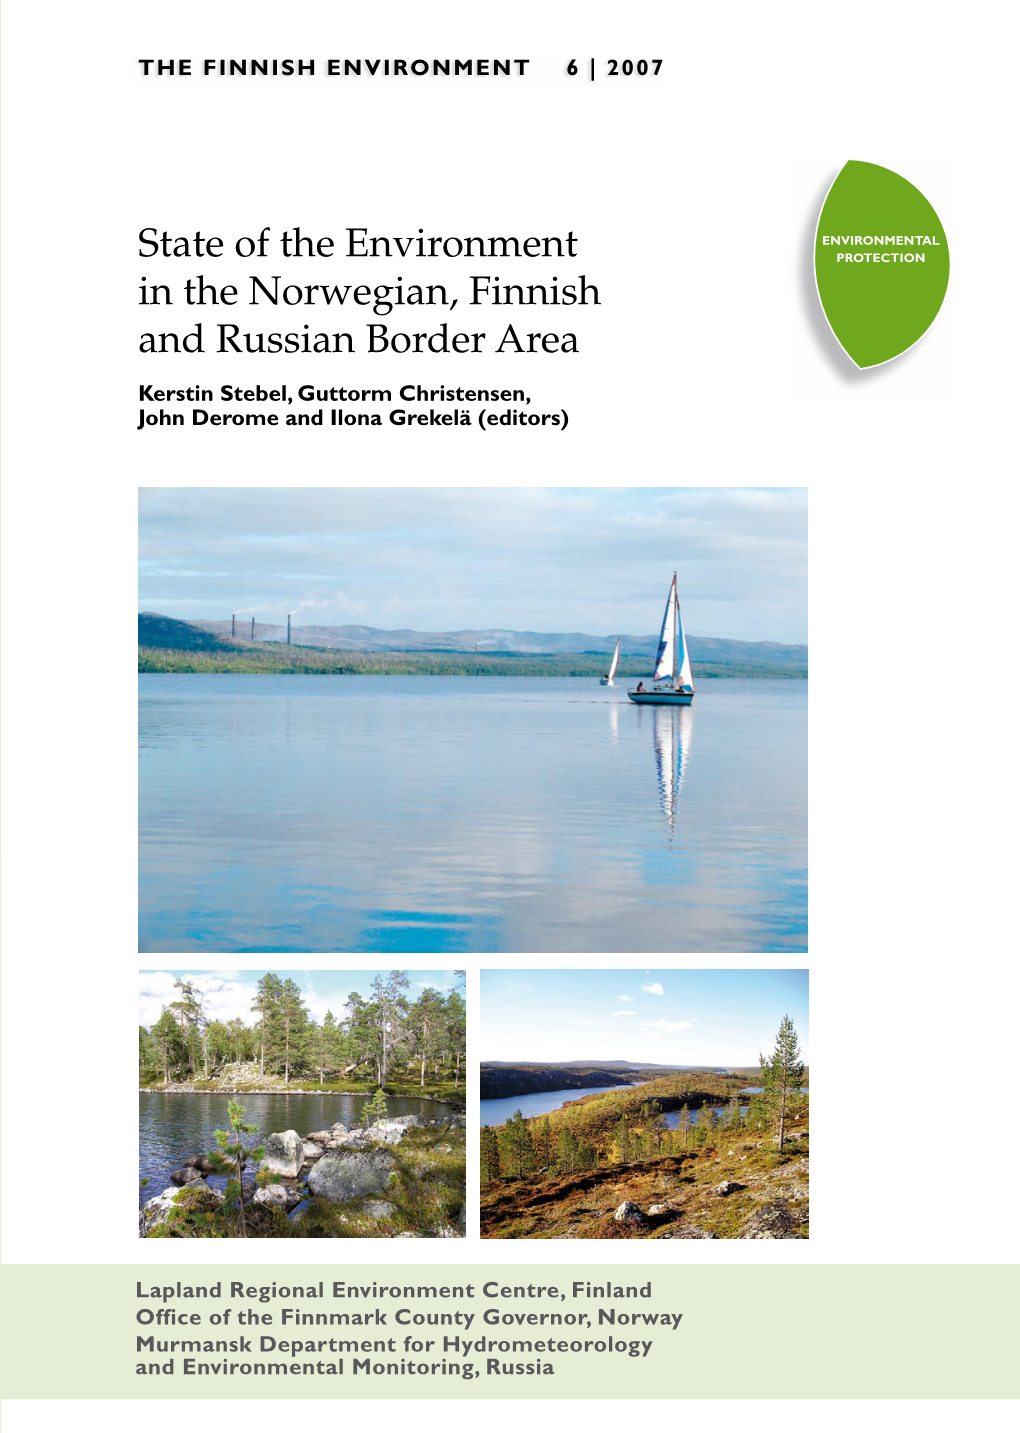 State of the Environment in the Norwegian, Finnish and Russian